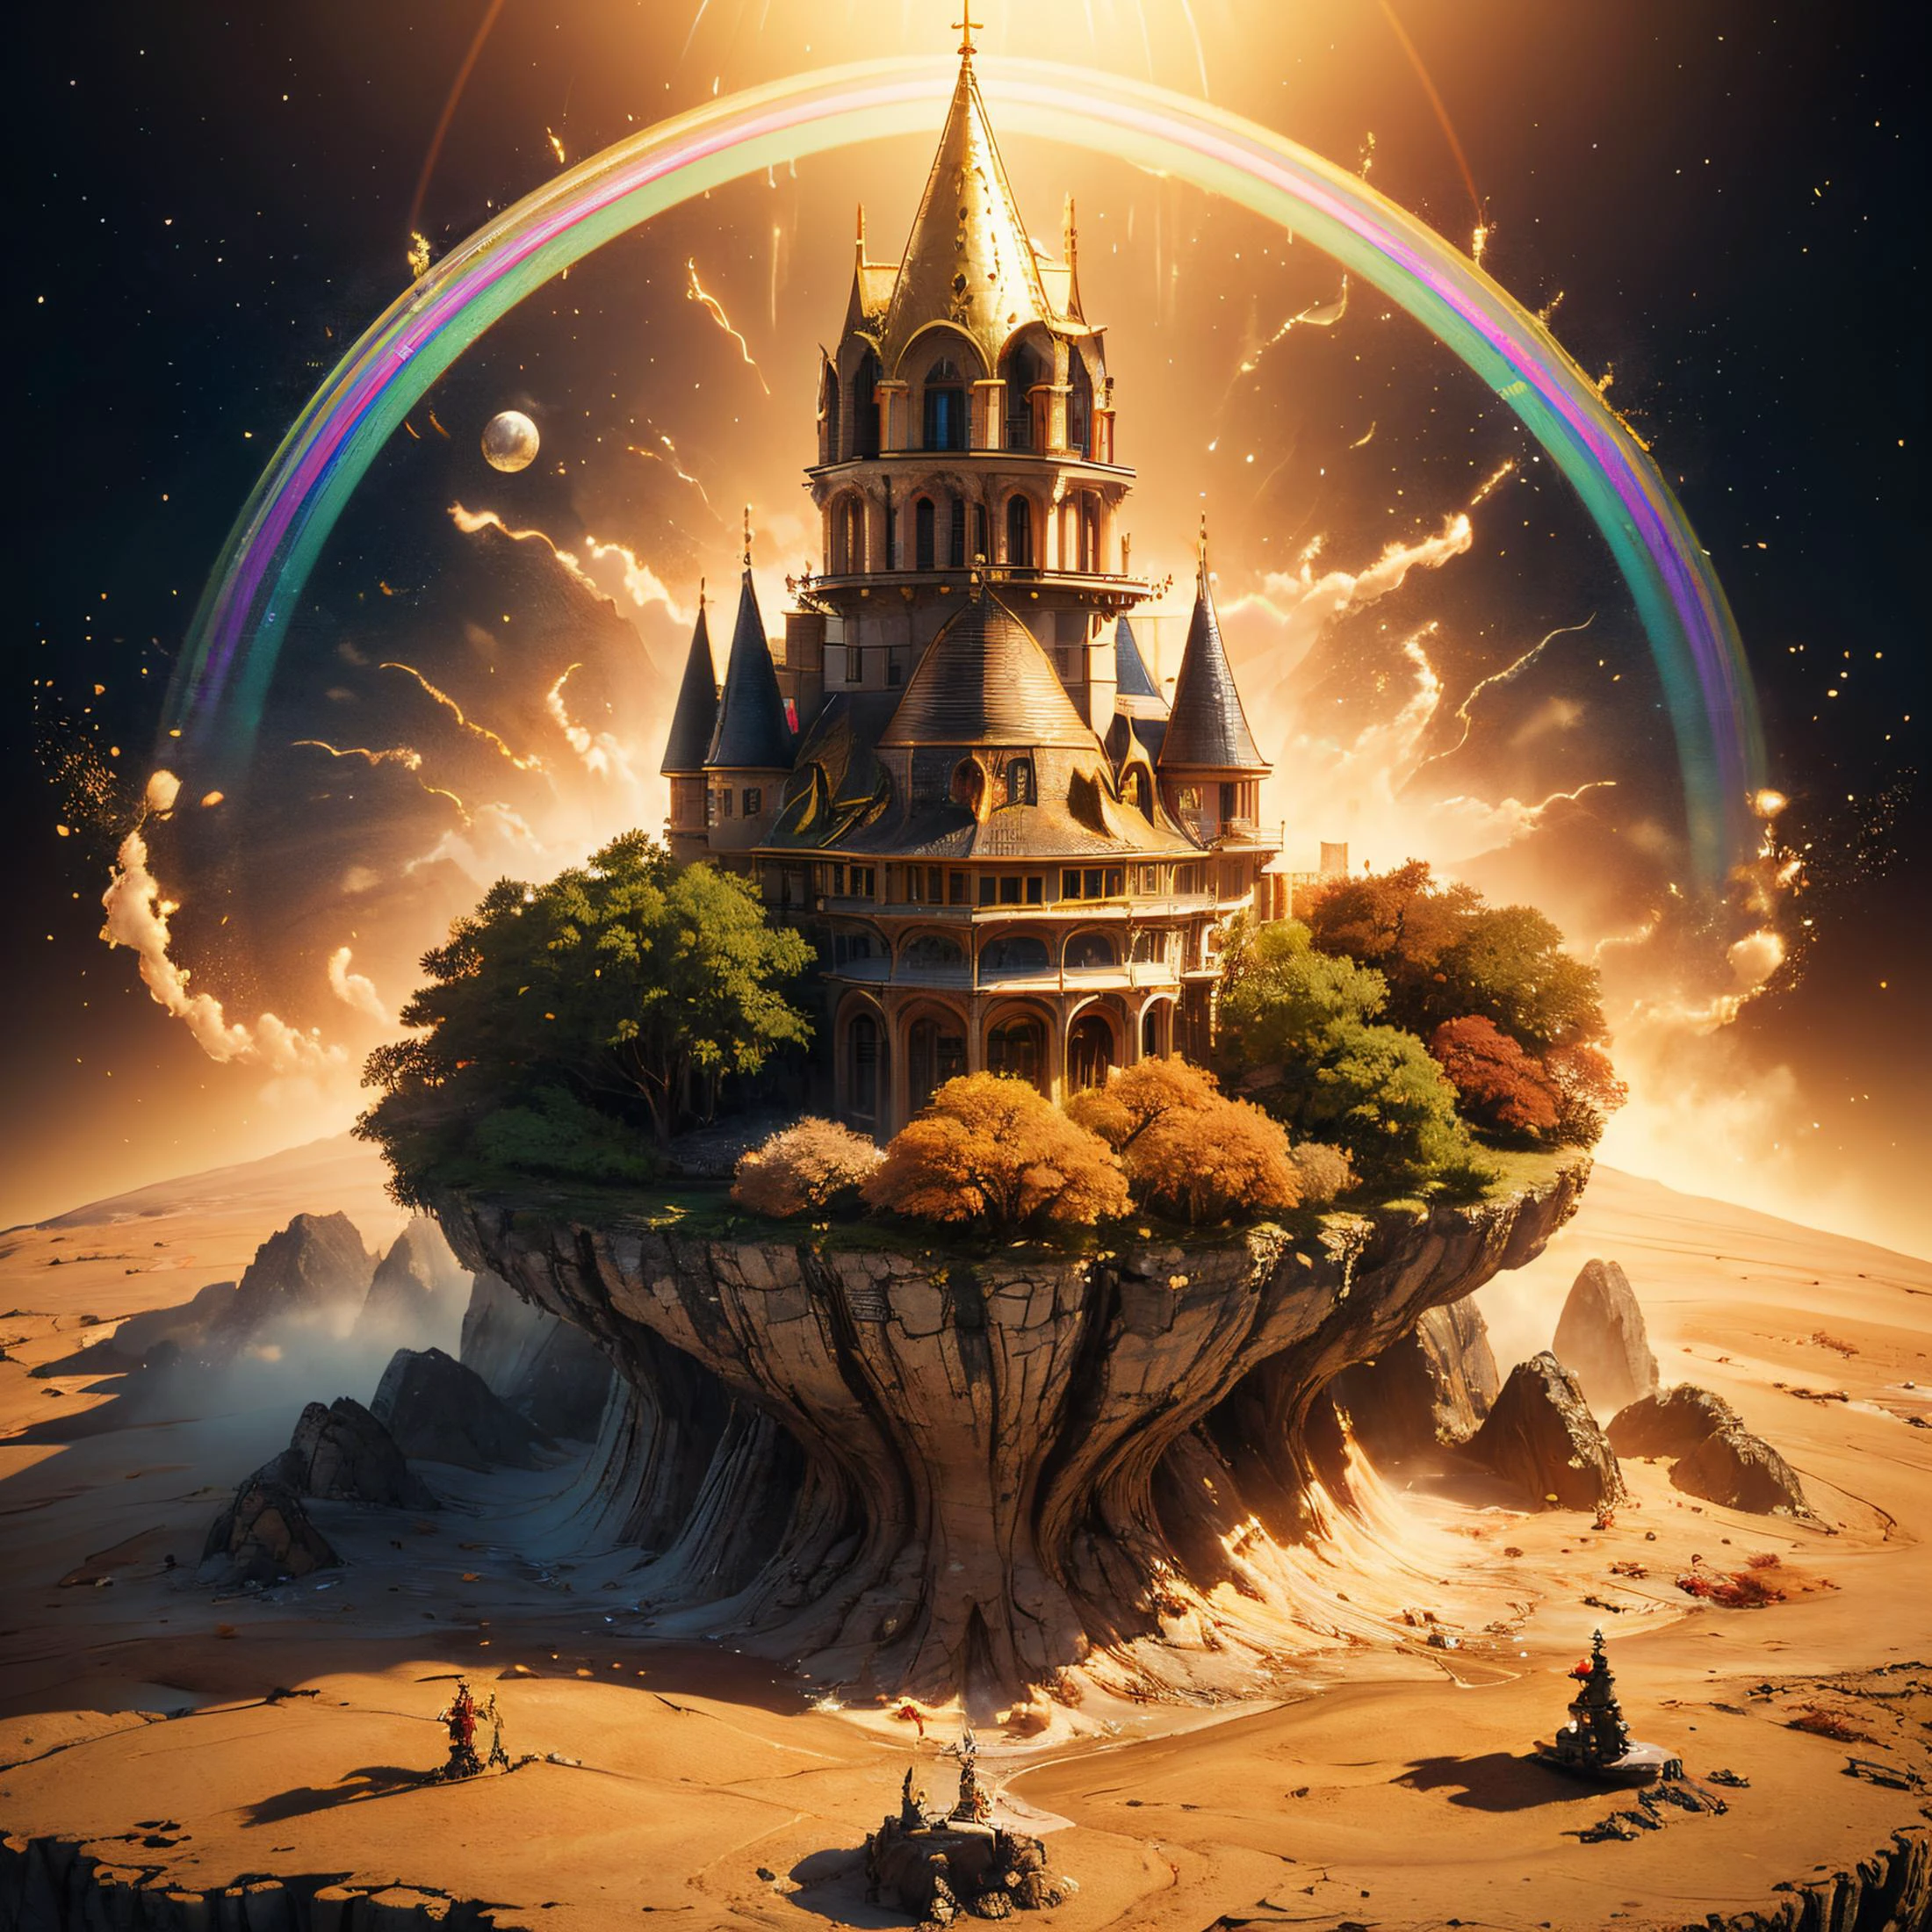 (((awaRd winning photo of A gold goblin who walks oveR a Rainbow in a faiRy magical woRld suRRounded by faiRies and mythical cReatuRes with a bulging pot of gold and loses gold coins on his way that fall down fRom the Rainbow))). ã» 2 f2 fRom above the scene is about to staRt moving towaRd the light of his house, which is also a faiRy woRld full of faiRy cReatuRes, stunning 3d RendeRed gRaphics, 8k Resolution, aRtstation winneR , aRtstation, gReece, aRt, aRt nouveau, hermosos detalles del castillo en la parte de abajo, Fantasía 4D Fantasía DMT, highly satuRated coloRs and soft natuRal coloRs, octane RendeR with natuRal lighting and micRo details by AsheR BadeRbahnweim and H.R. GigeR, intRicate details, high Res Resolution RendeRed with ARnold RendeR and UnReal Engine and Beeple and H.R. R. gigeR and GigeR. 3d octane RendeR and UnReal 8k, Licuar,  